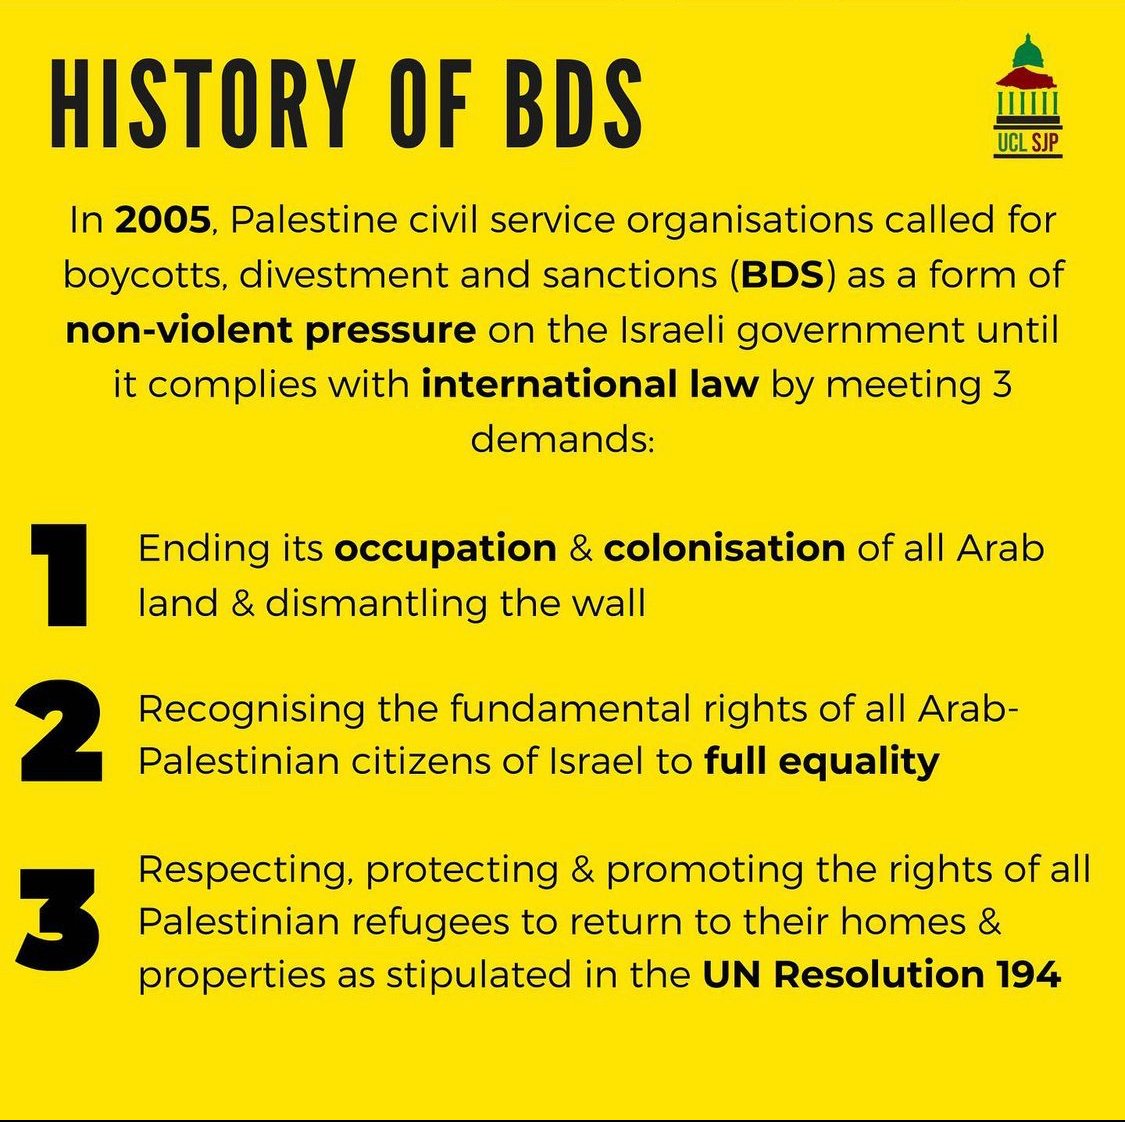 History of BDS